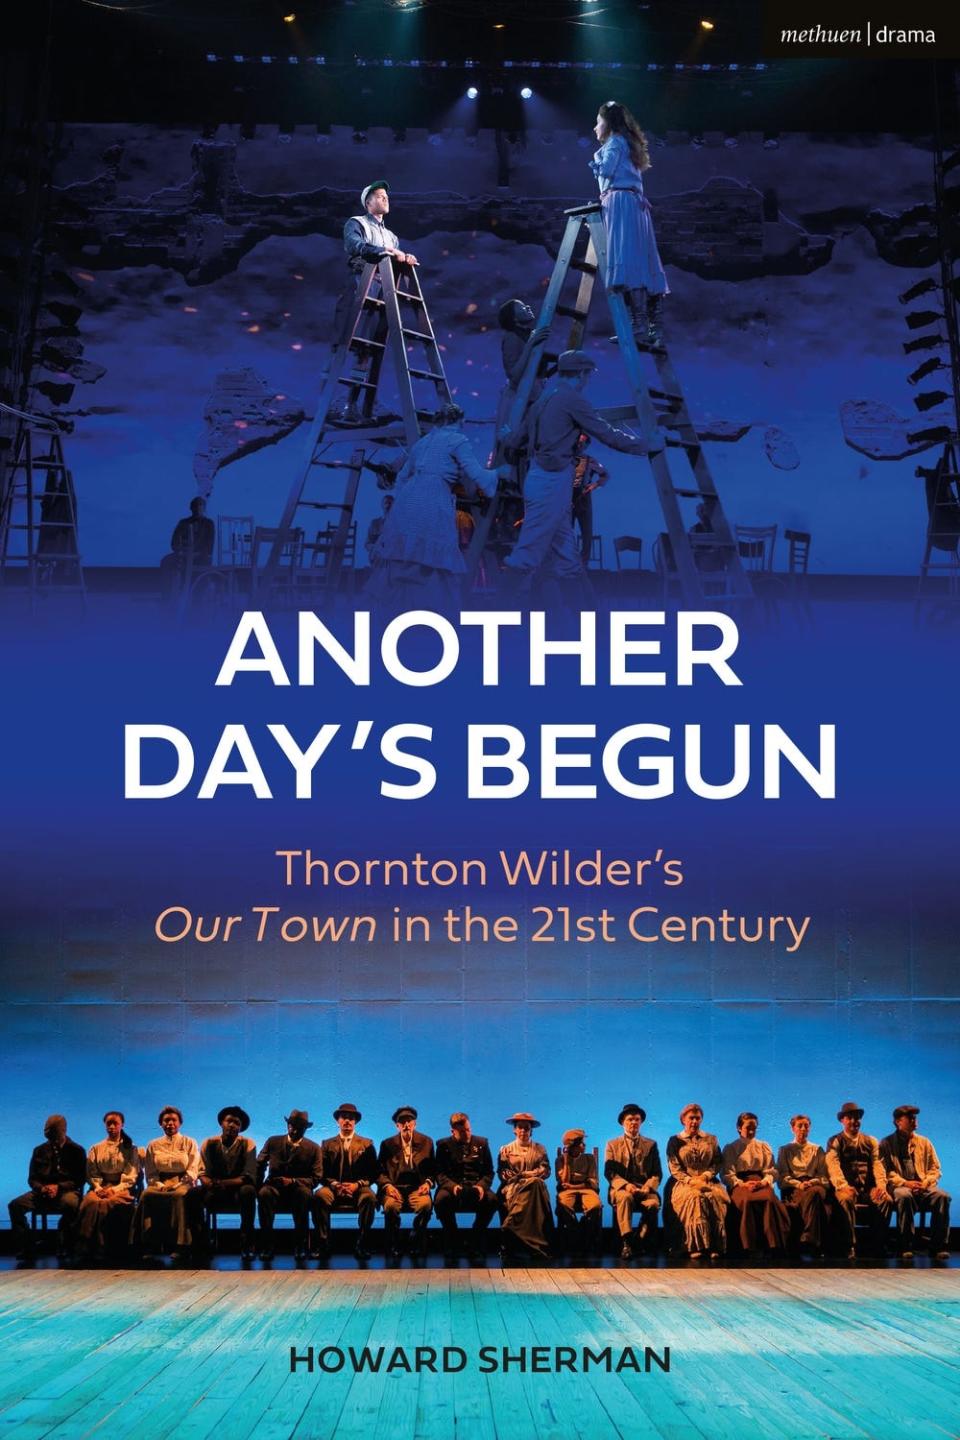 The cover image of Howard Sherman’s “Another Day’s Begun: Thornton Wilder’s ‘Our Town’ in the 21st Century.”